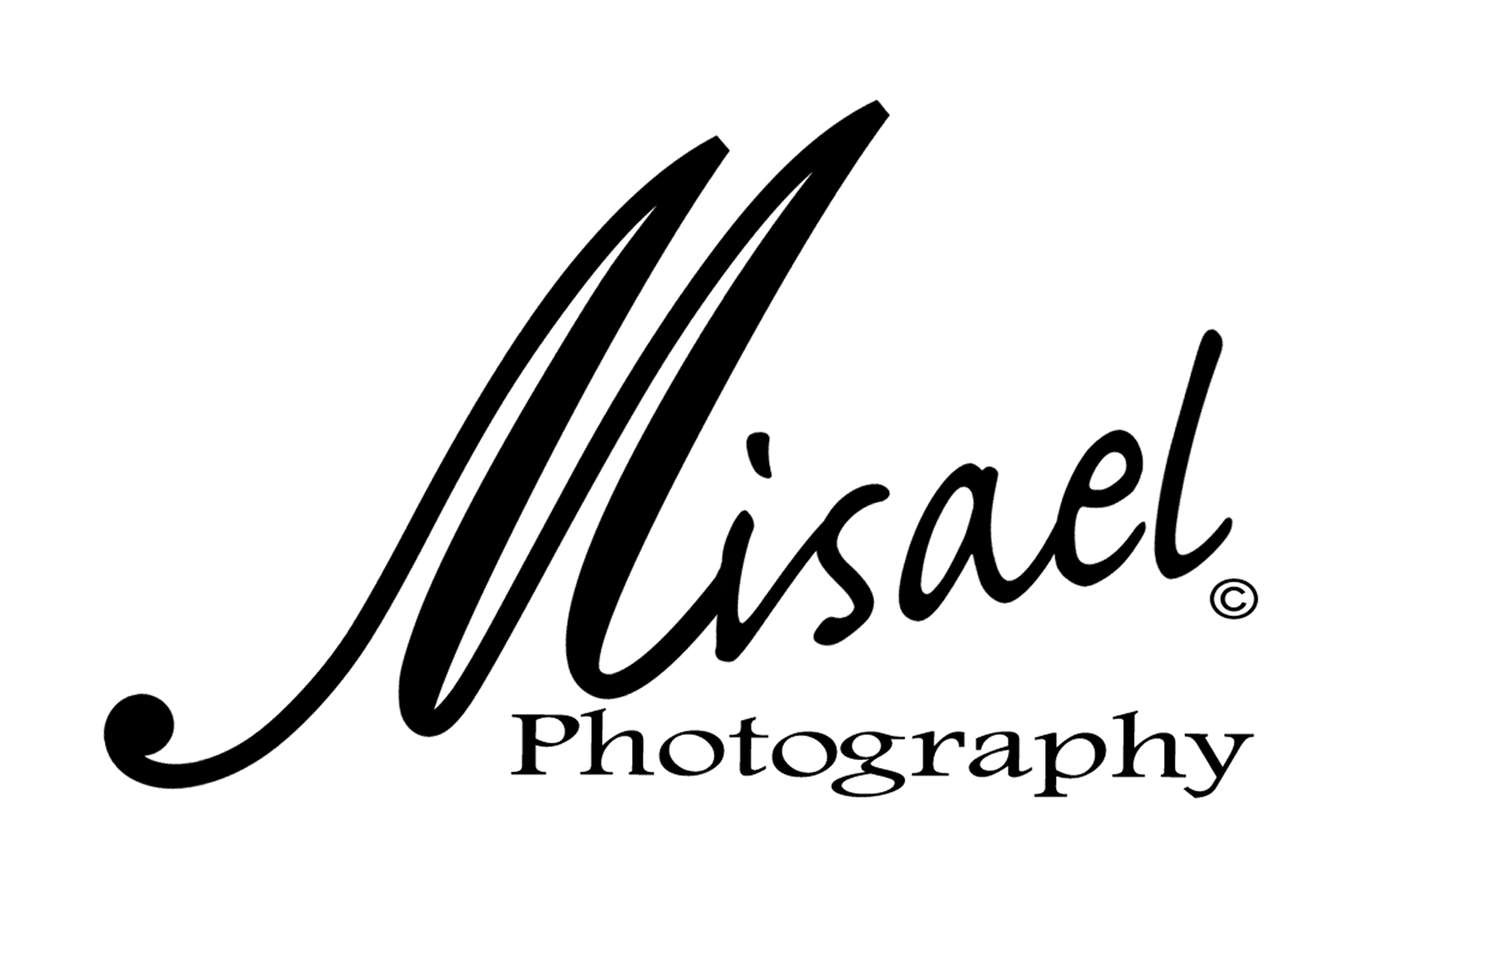 Misael Photography